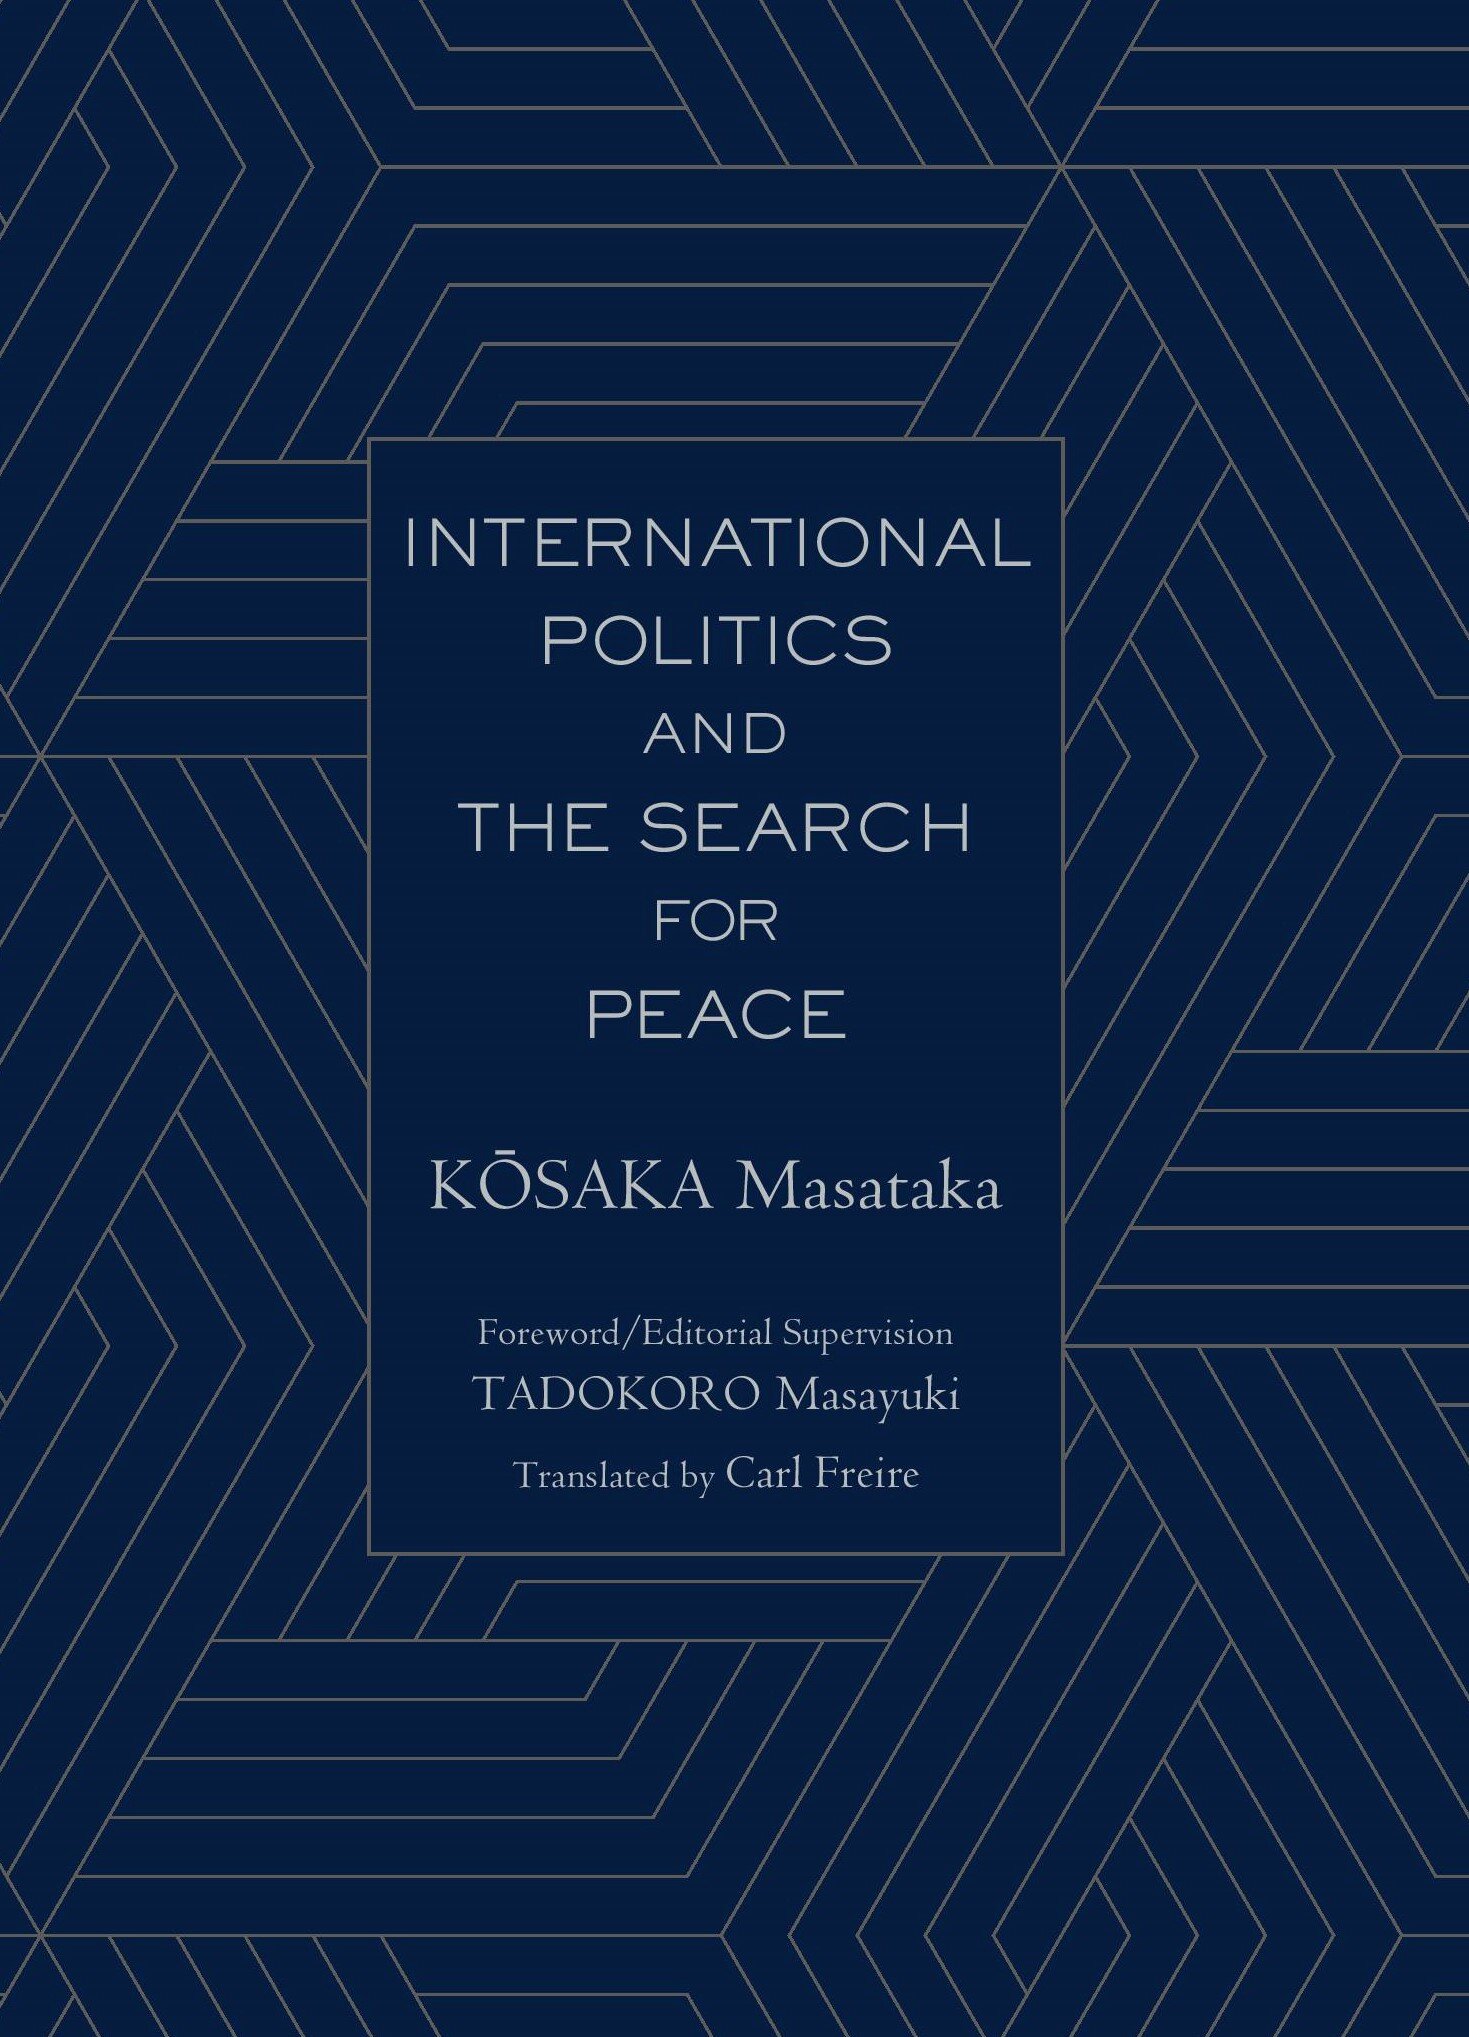 International Politics and the Search for Peace